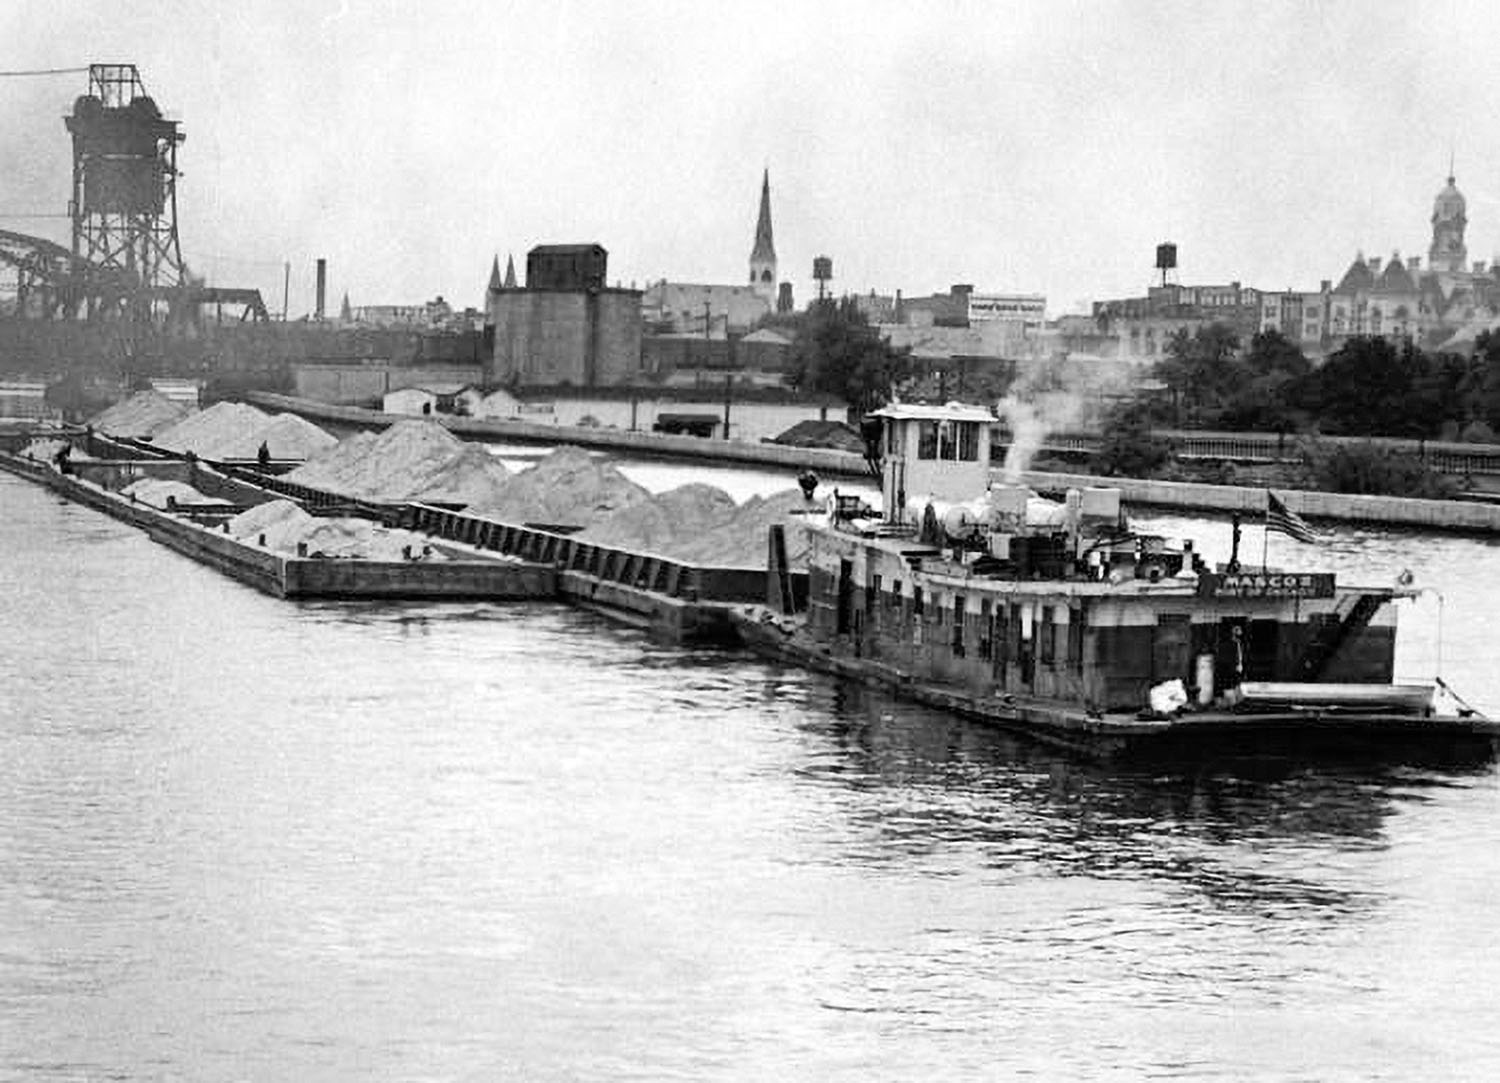 The North Star Was An Early Diesel Towboat